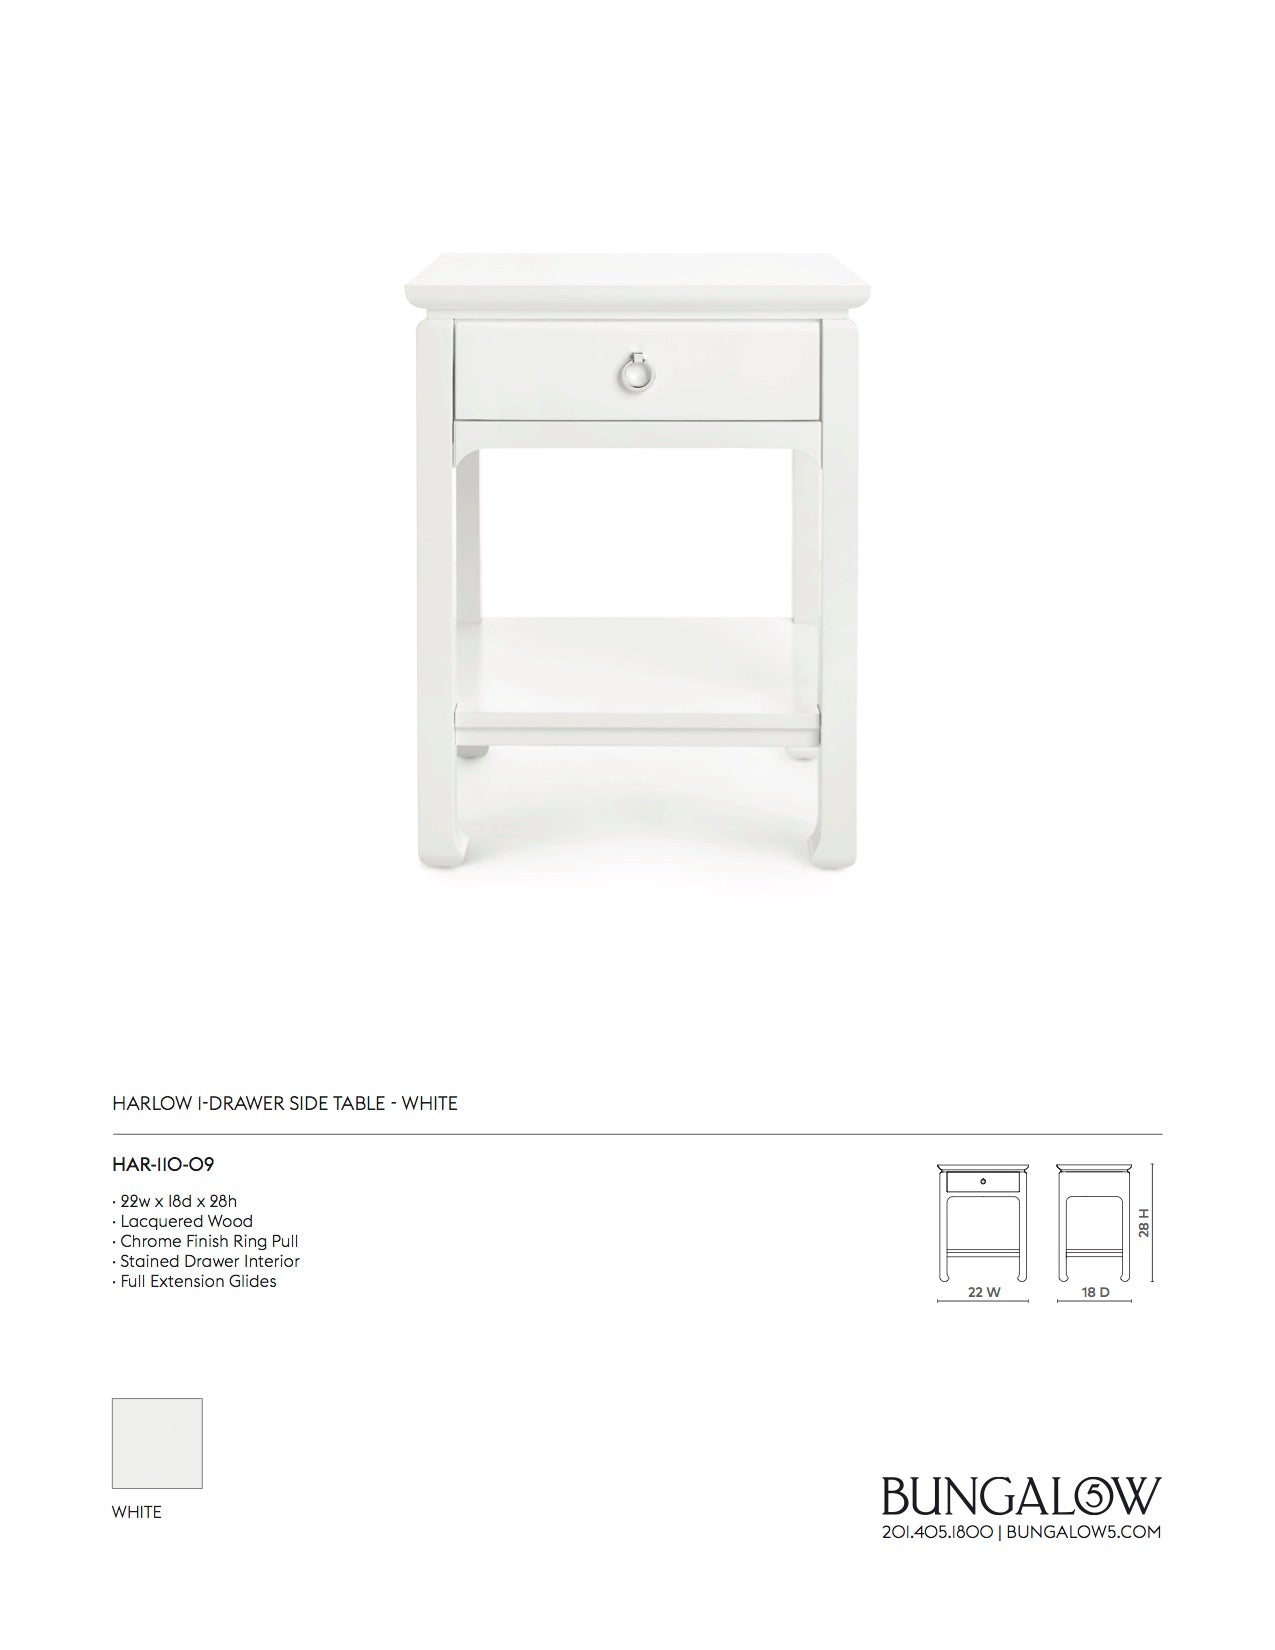 Bungalow 5 Harlow 1 Drawer Side Table White Tearsheet